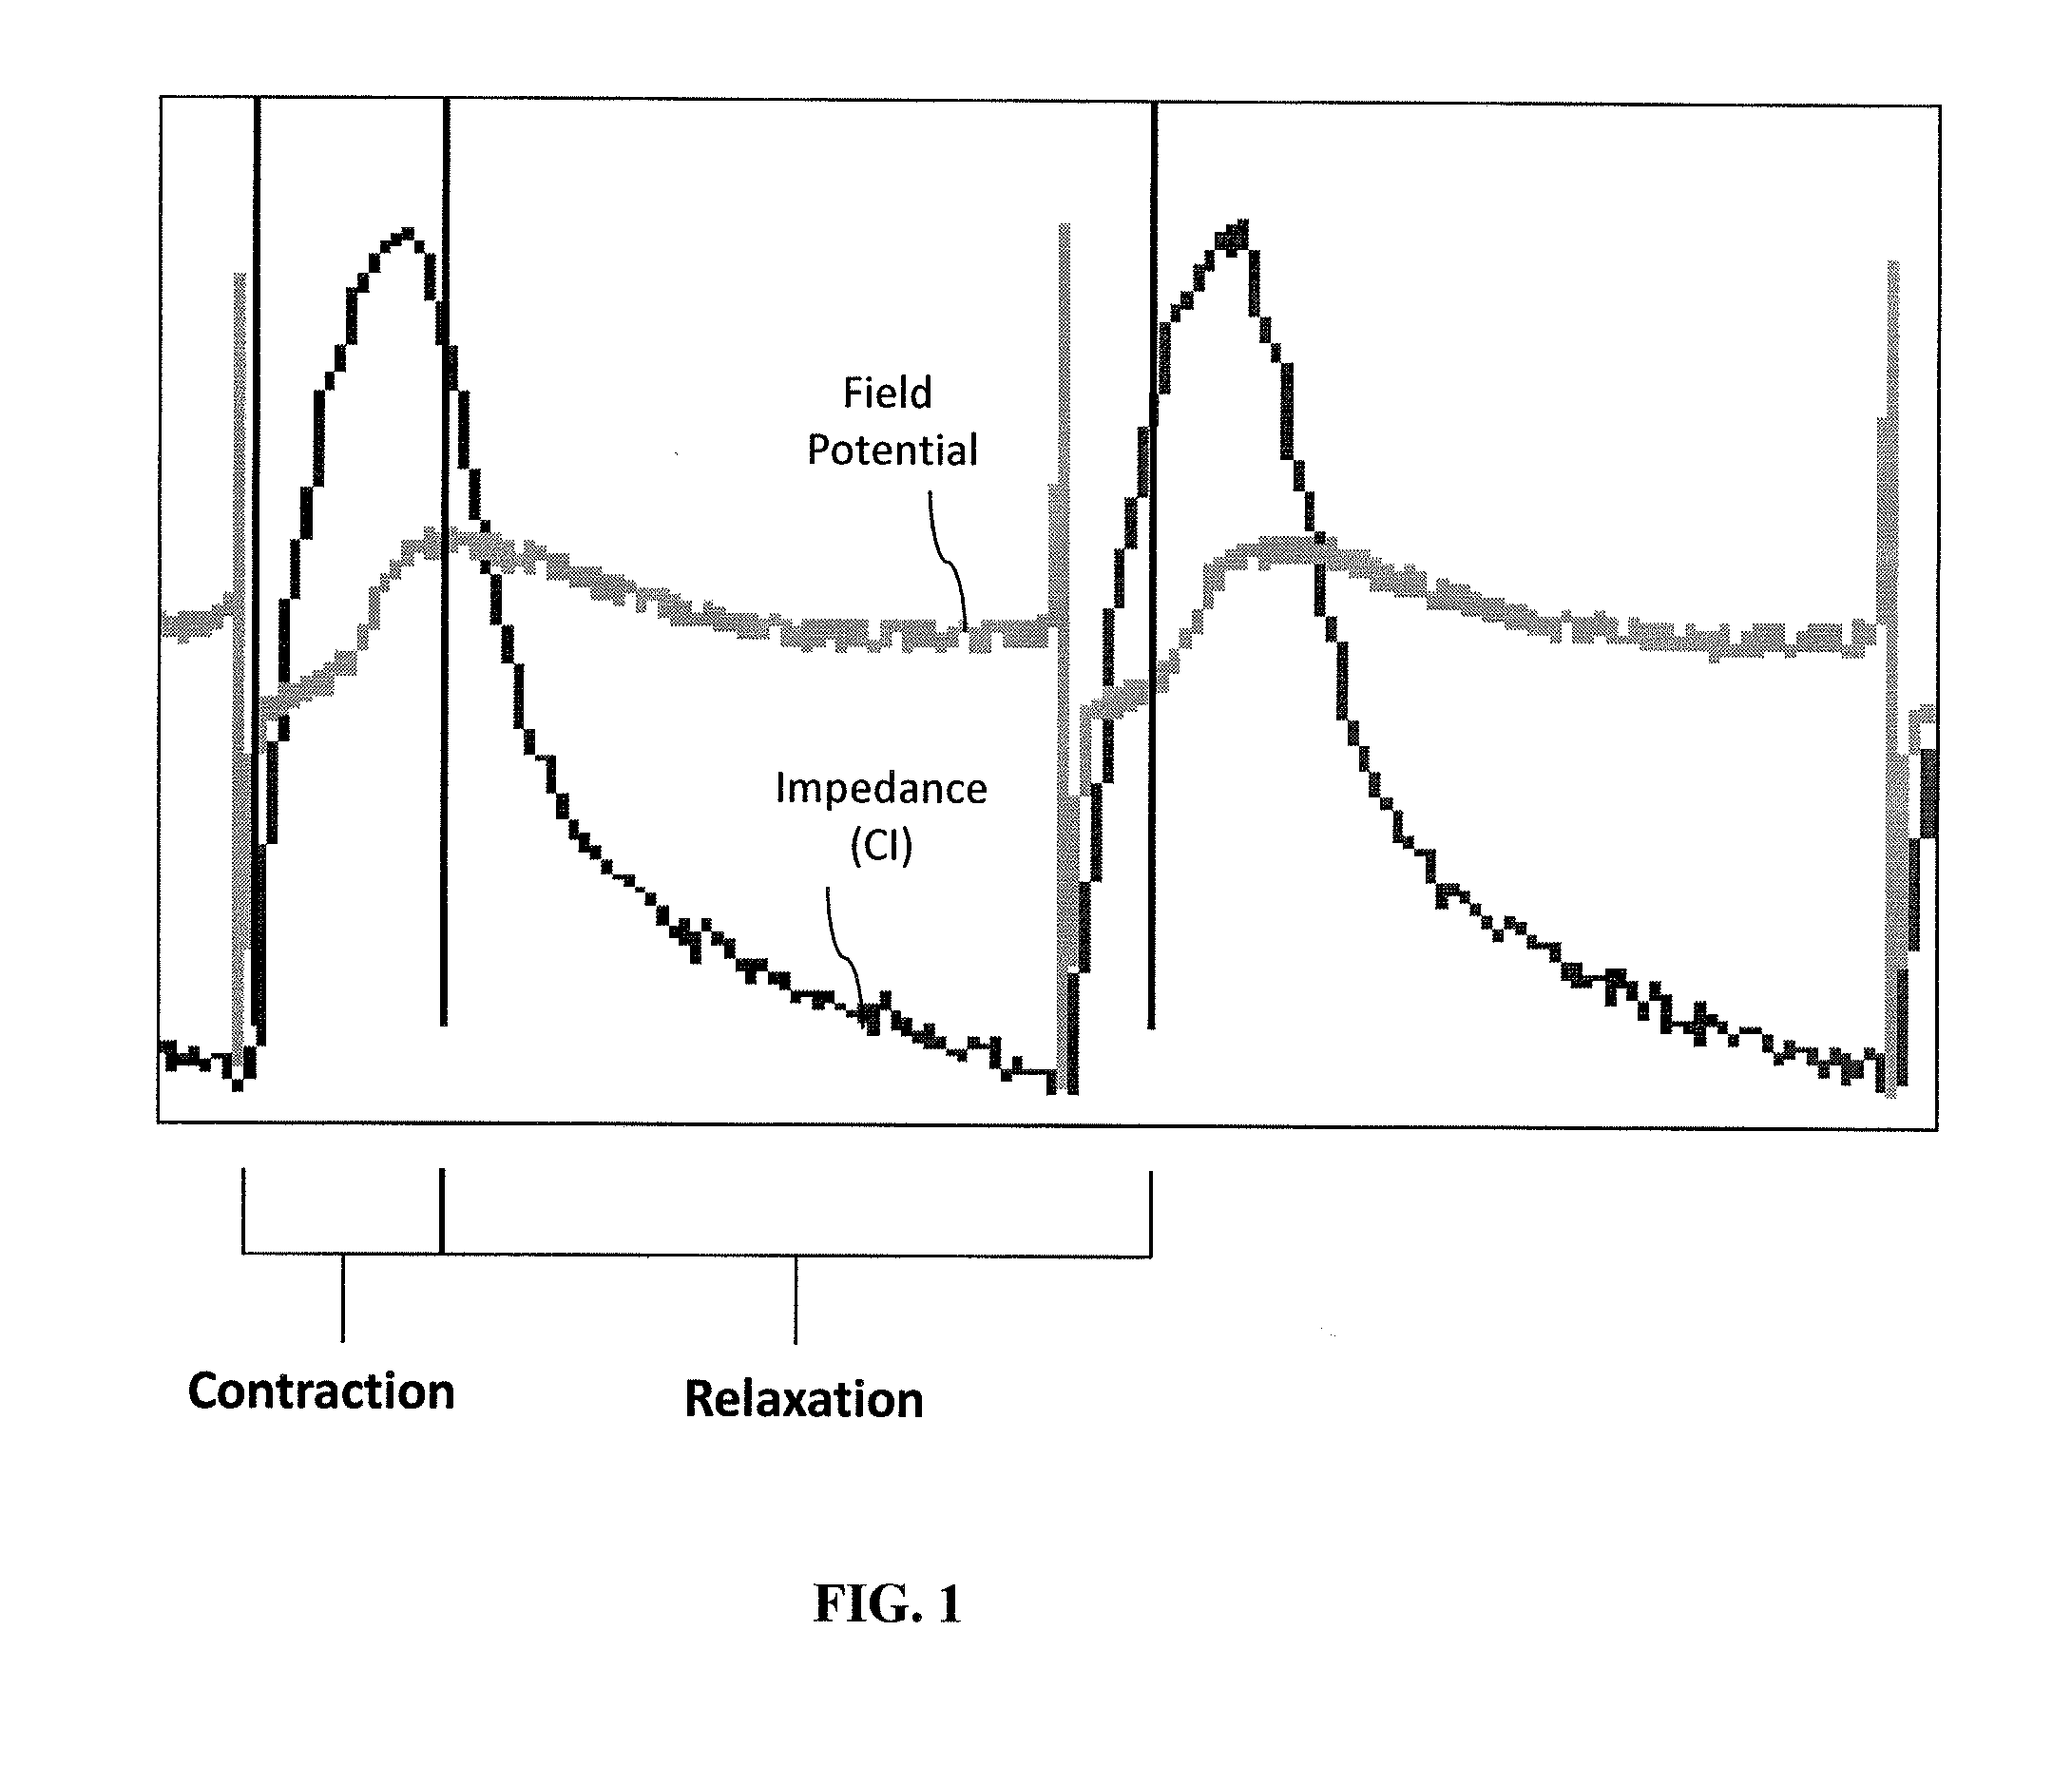 System and method for monitoring cardiomyocyte beating, viability, morphology, and electrophysiological properties